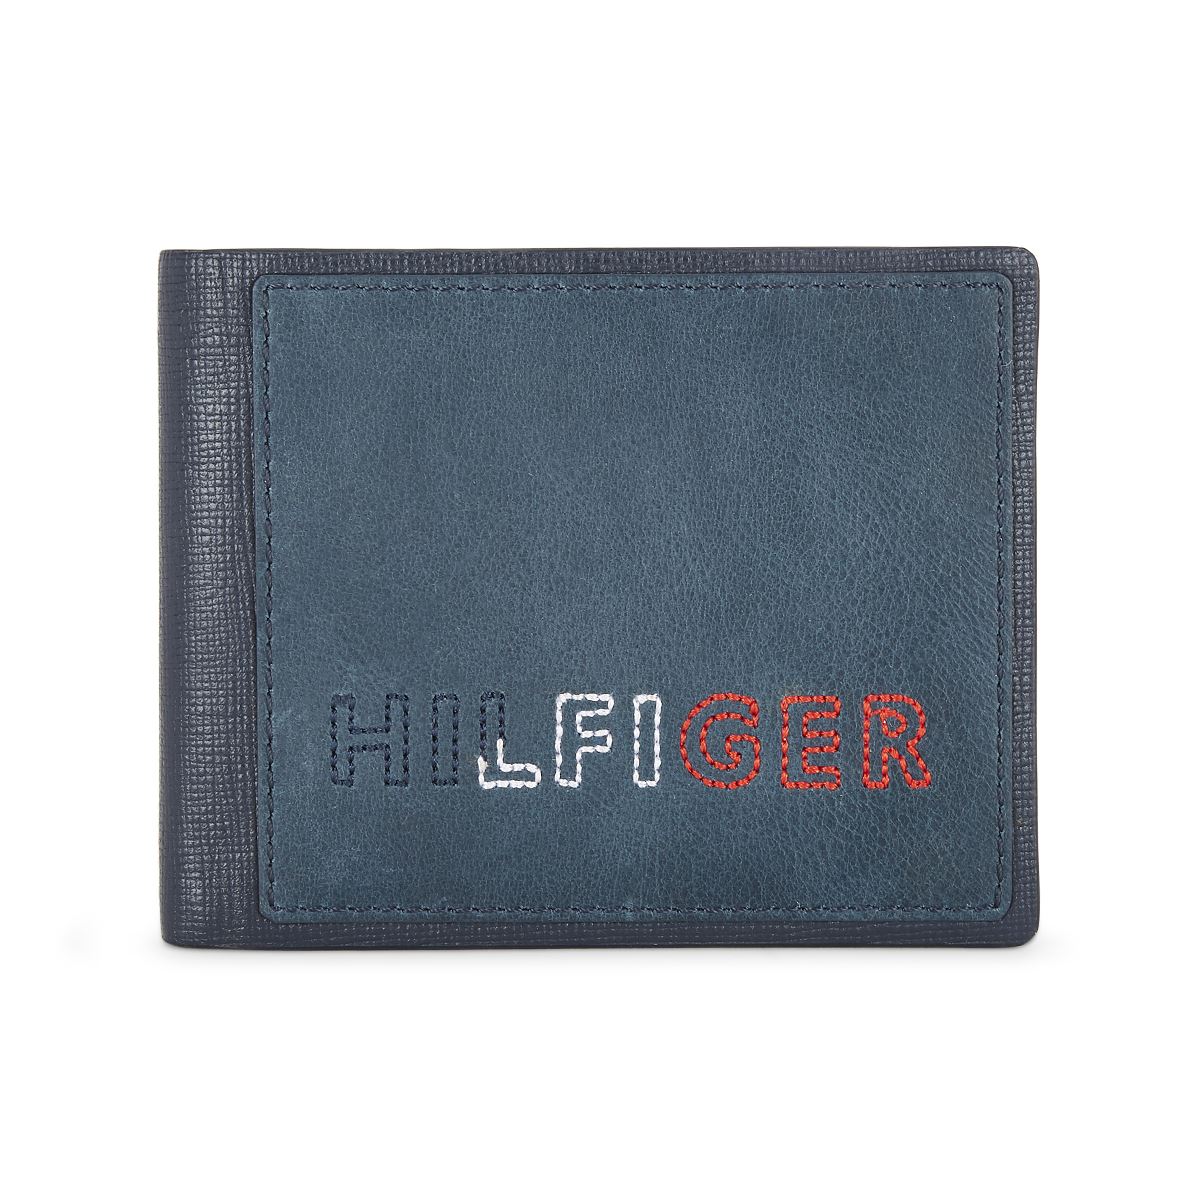 Tommy Hilfiger Leather Mens Embroidered Navy Emerald Passcase Wallet